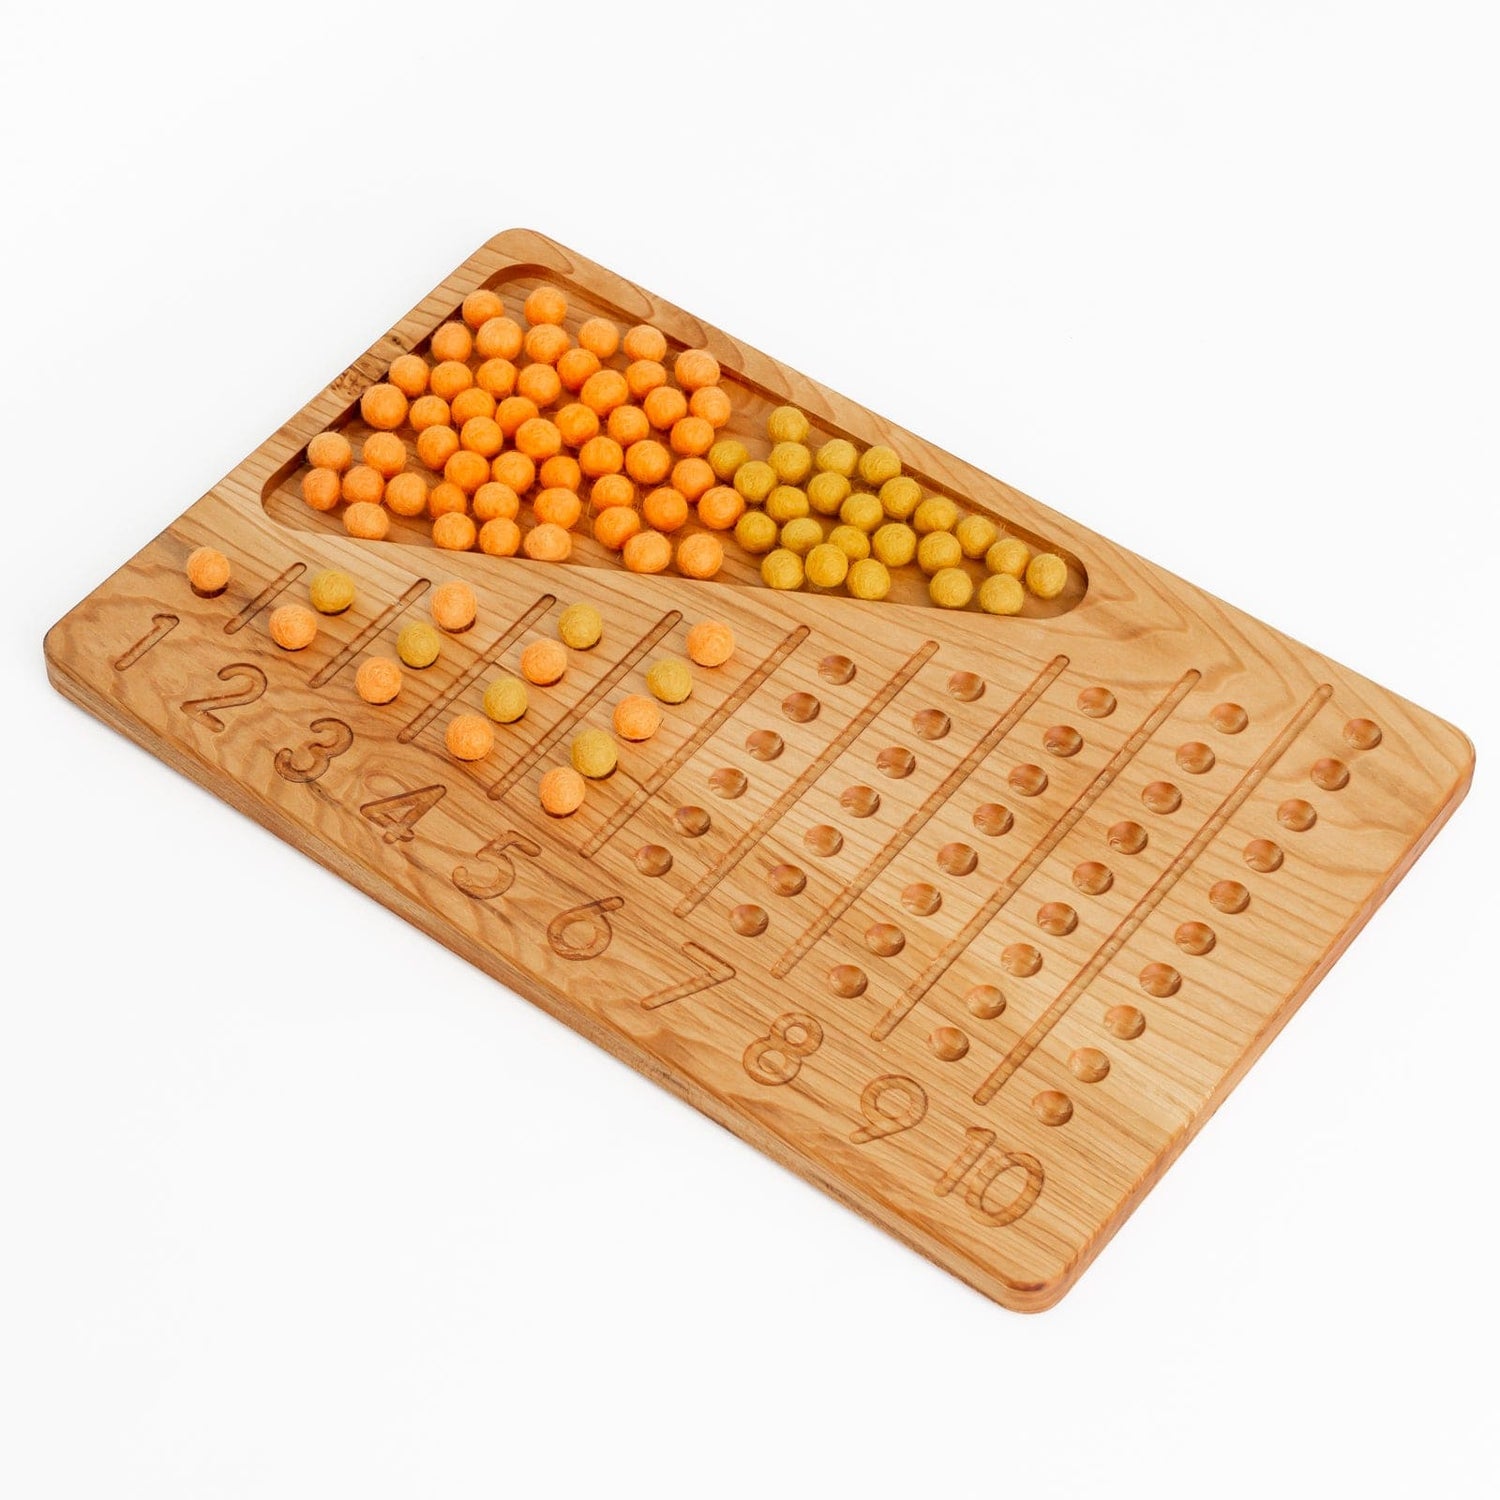 Oyuncak House Educational Wooden Counting Abacus Tray